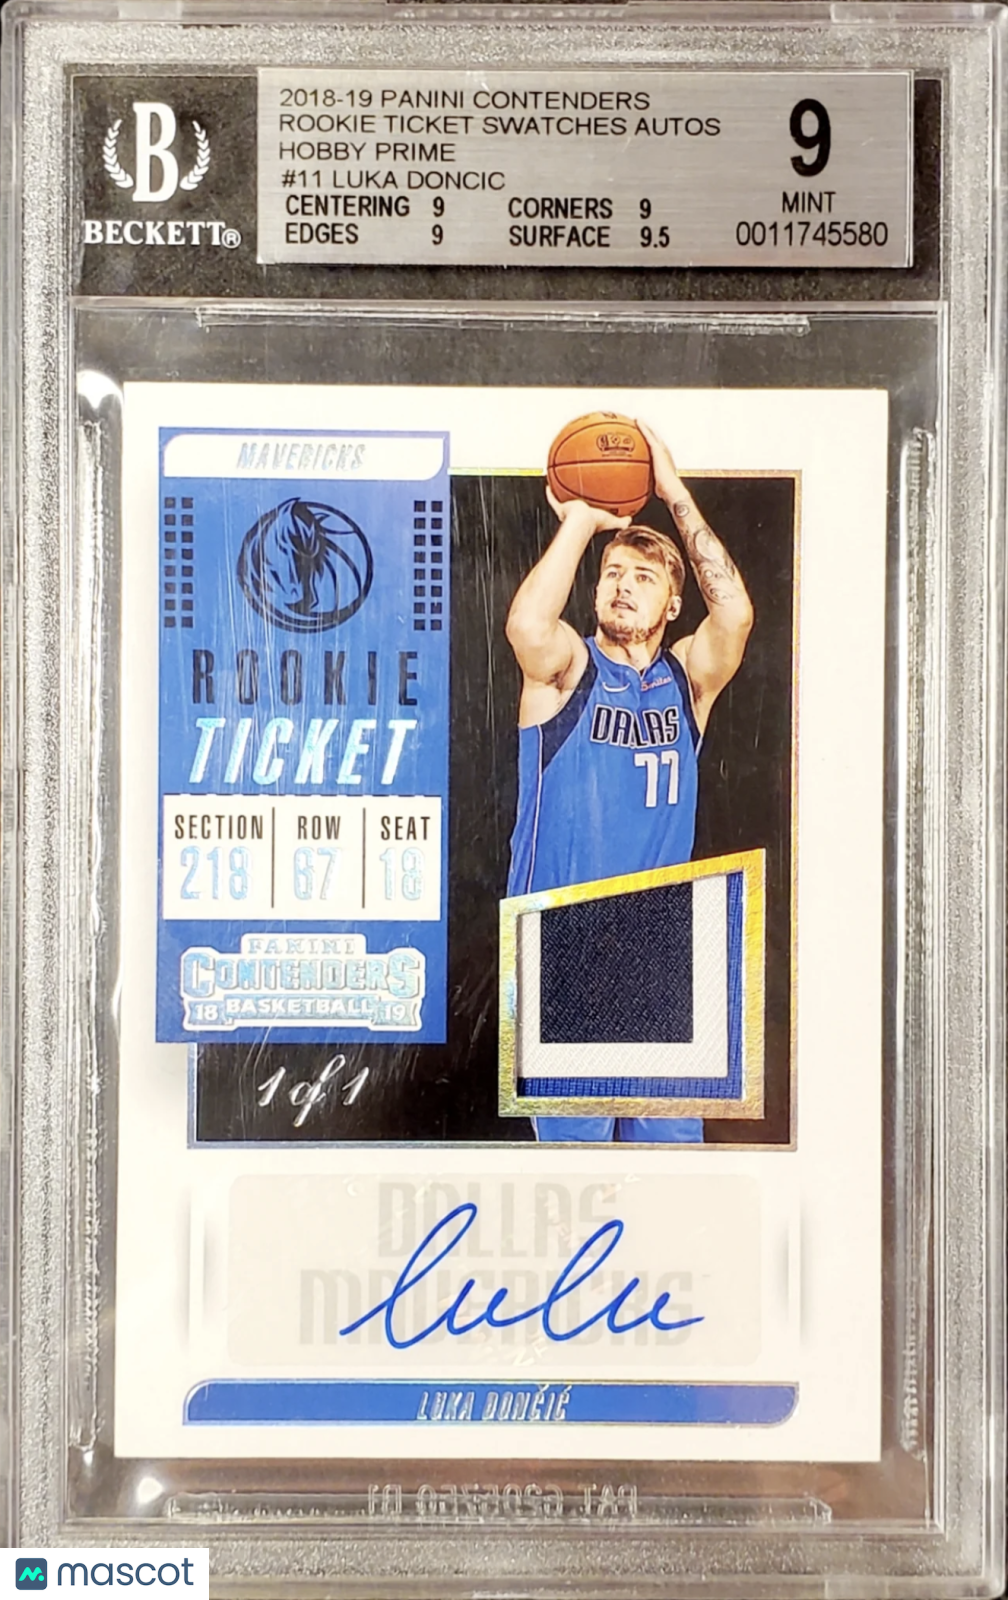 LUKA DONCIC 2018-19 CONTENDERS ROOKIE TICKET PRIME PATCH AUTO #1/1 BGS 9/10 AUTO